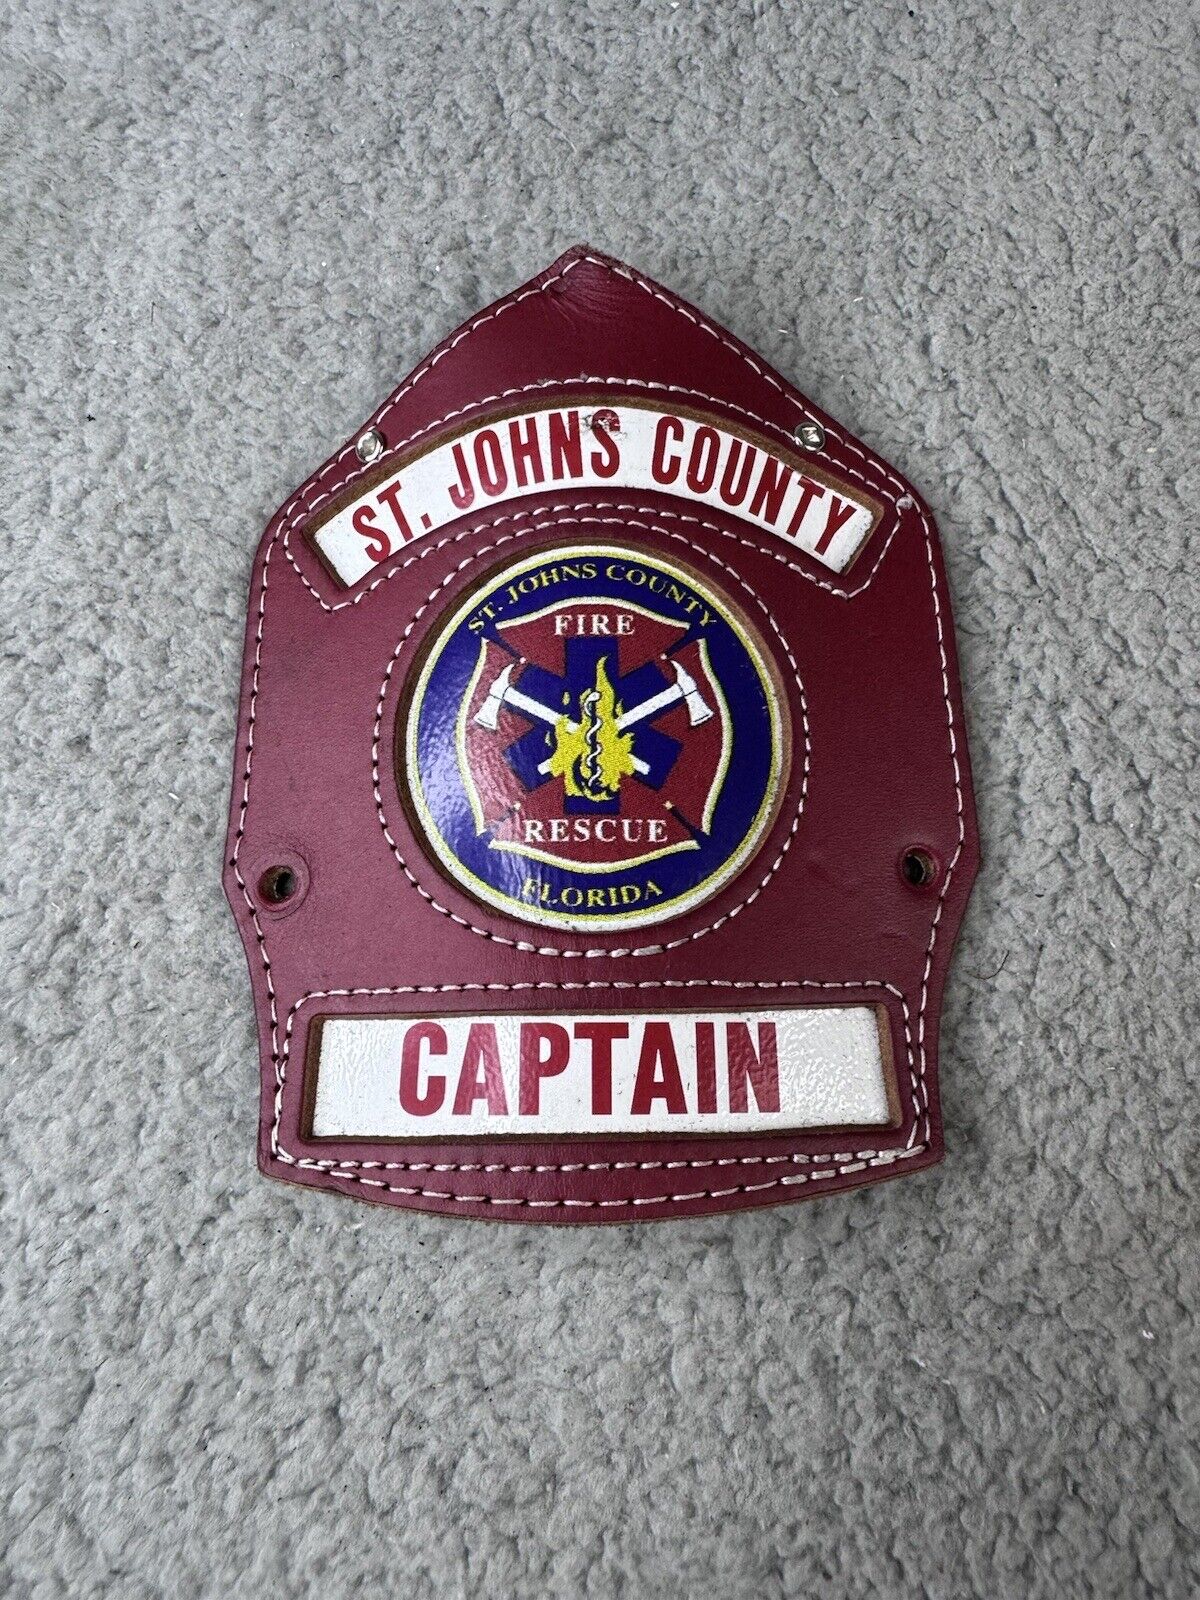 Cairns Red Leather Fire Helmet Shield Brass Mounting St. John’s Florida Captain